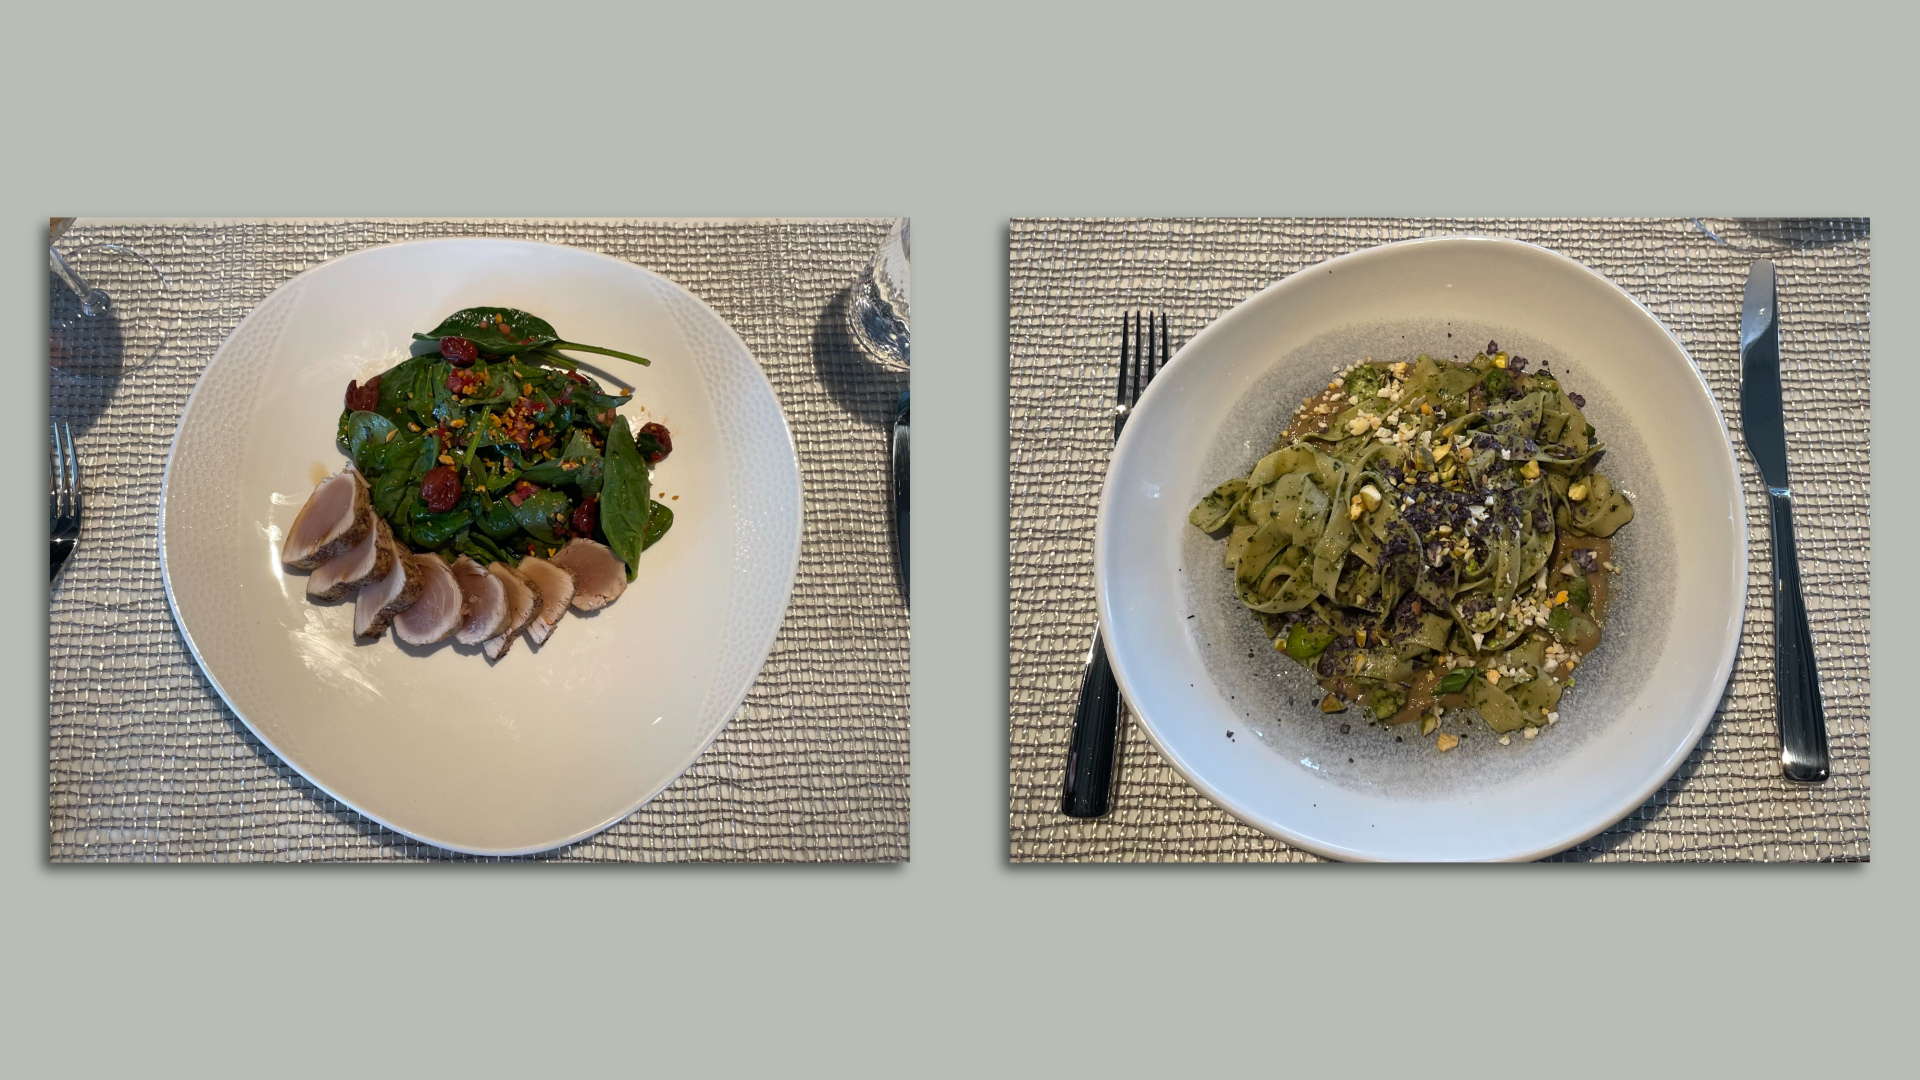 Two images side by side, one depicting a salad with smoked fish and the other showing a bowl of pesto pasta.